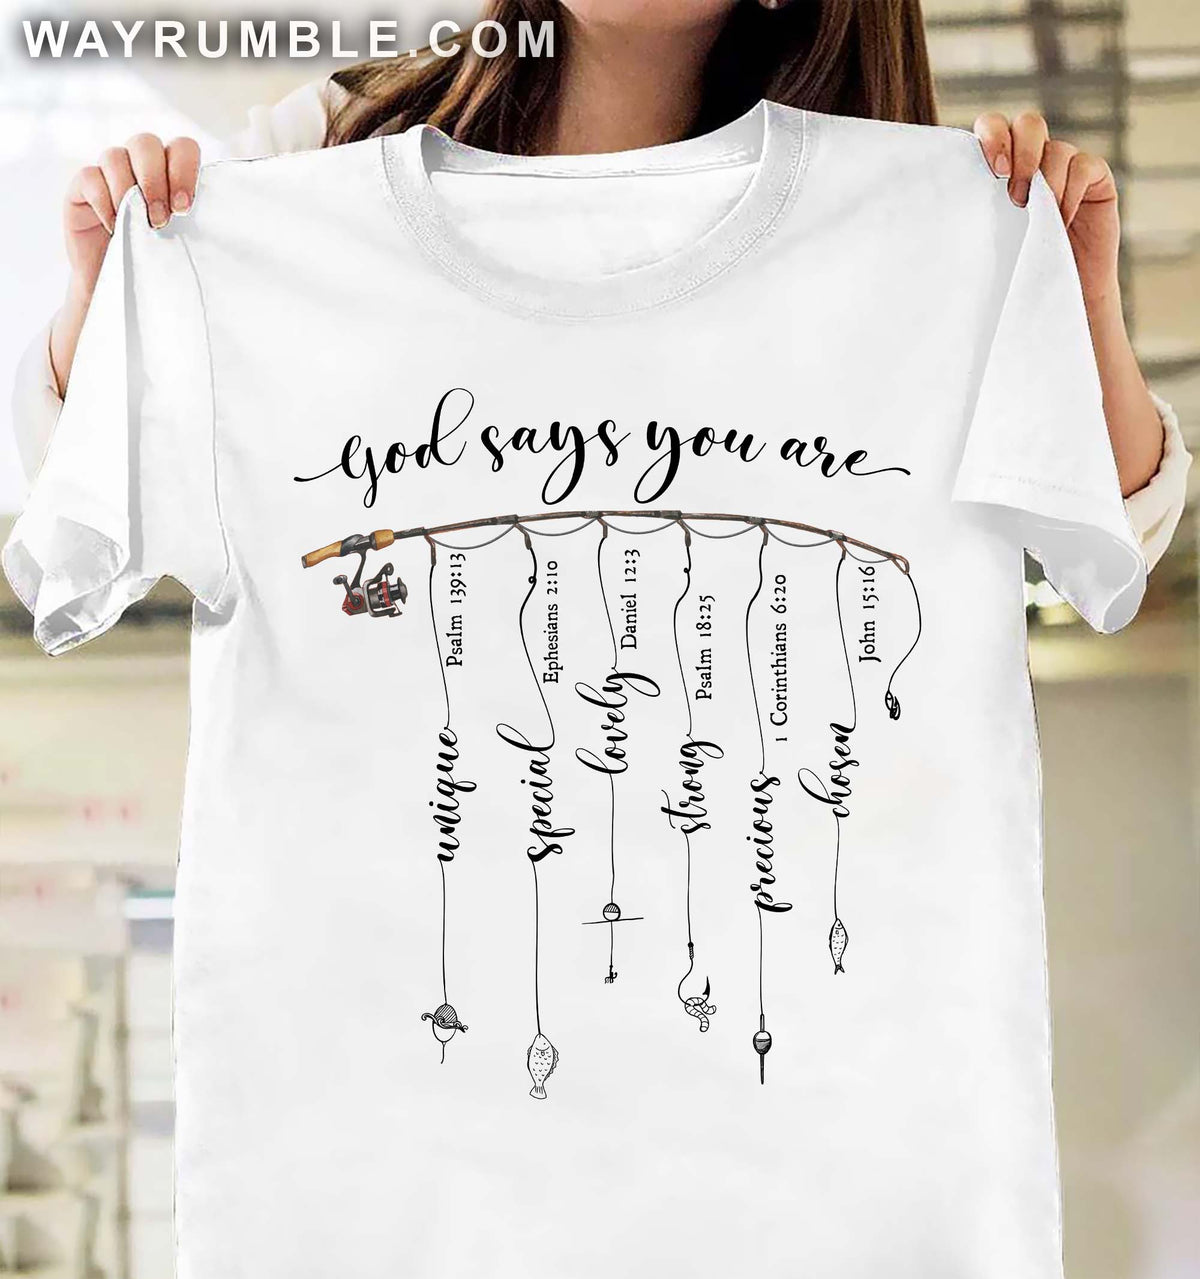 Fishing apparel, God says you are unique special - Jesus Apparel - Wayrumble